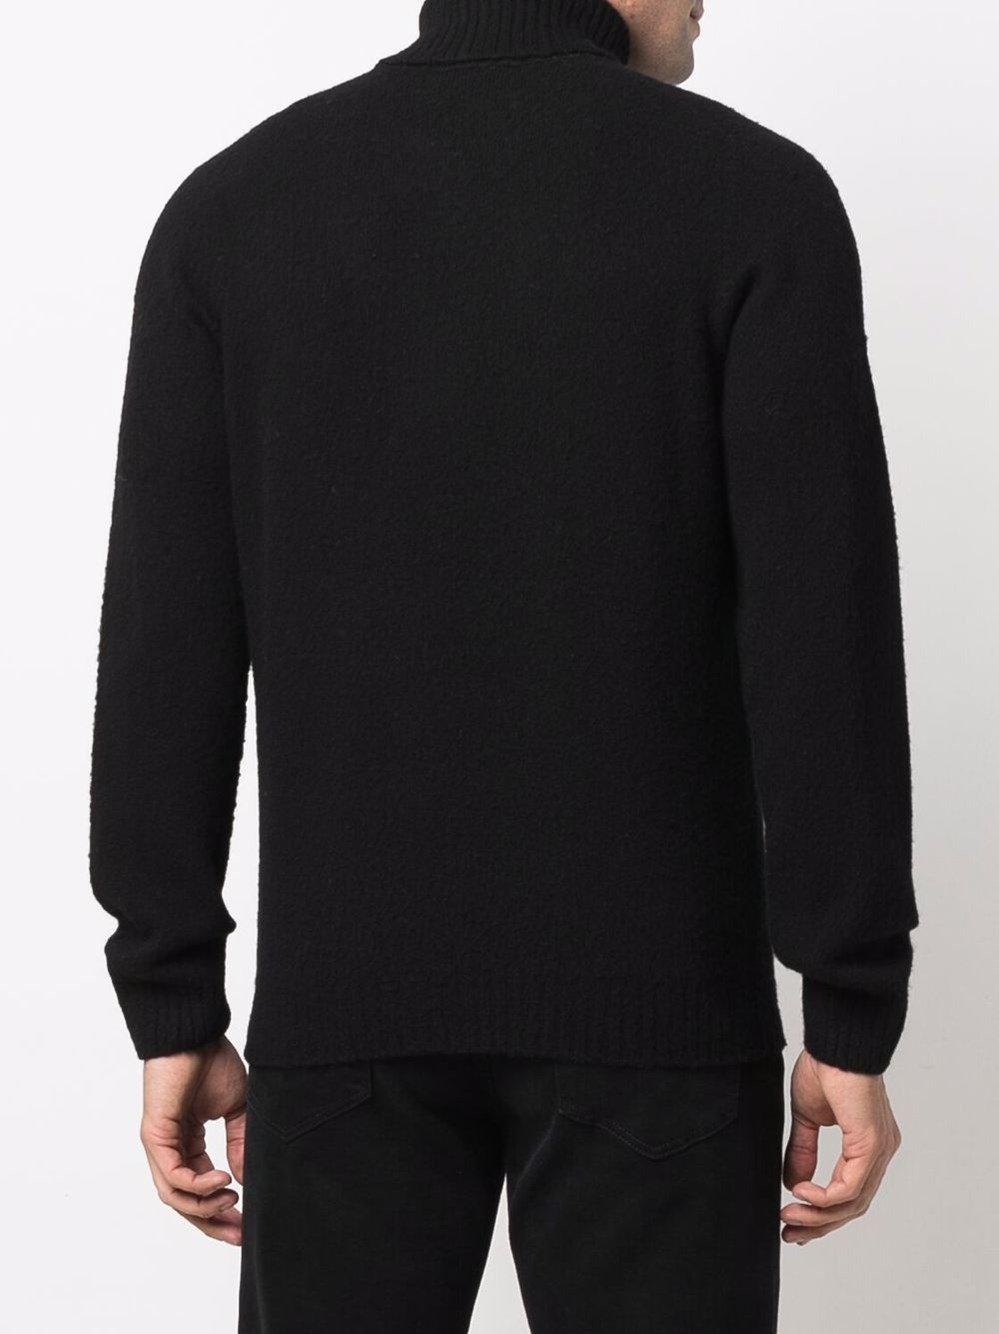 Tagliatore men's ribbed knit turtleneck sweater Cooked